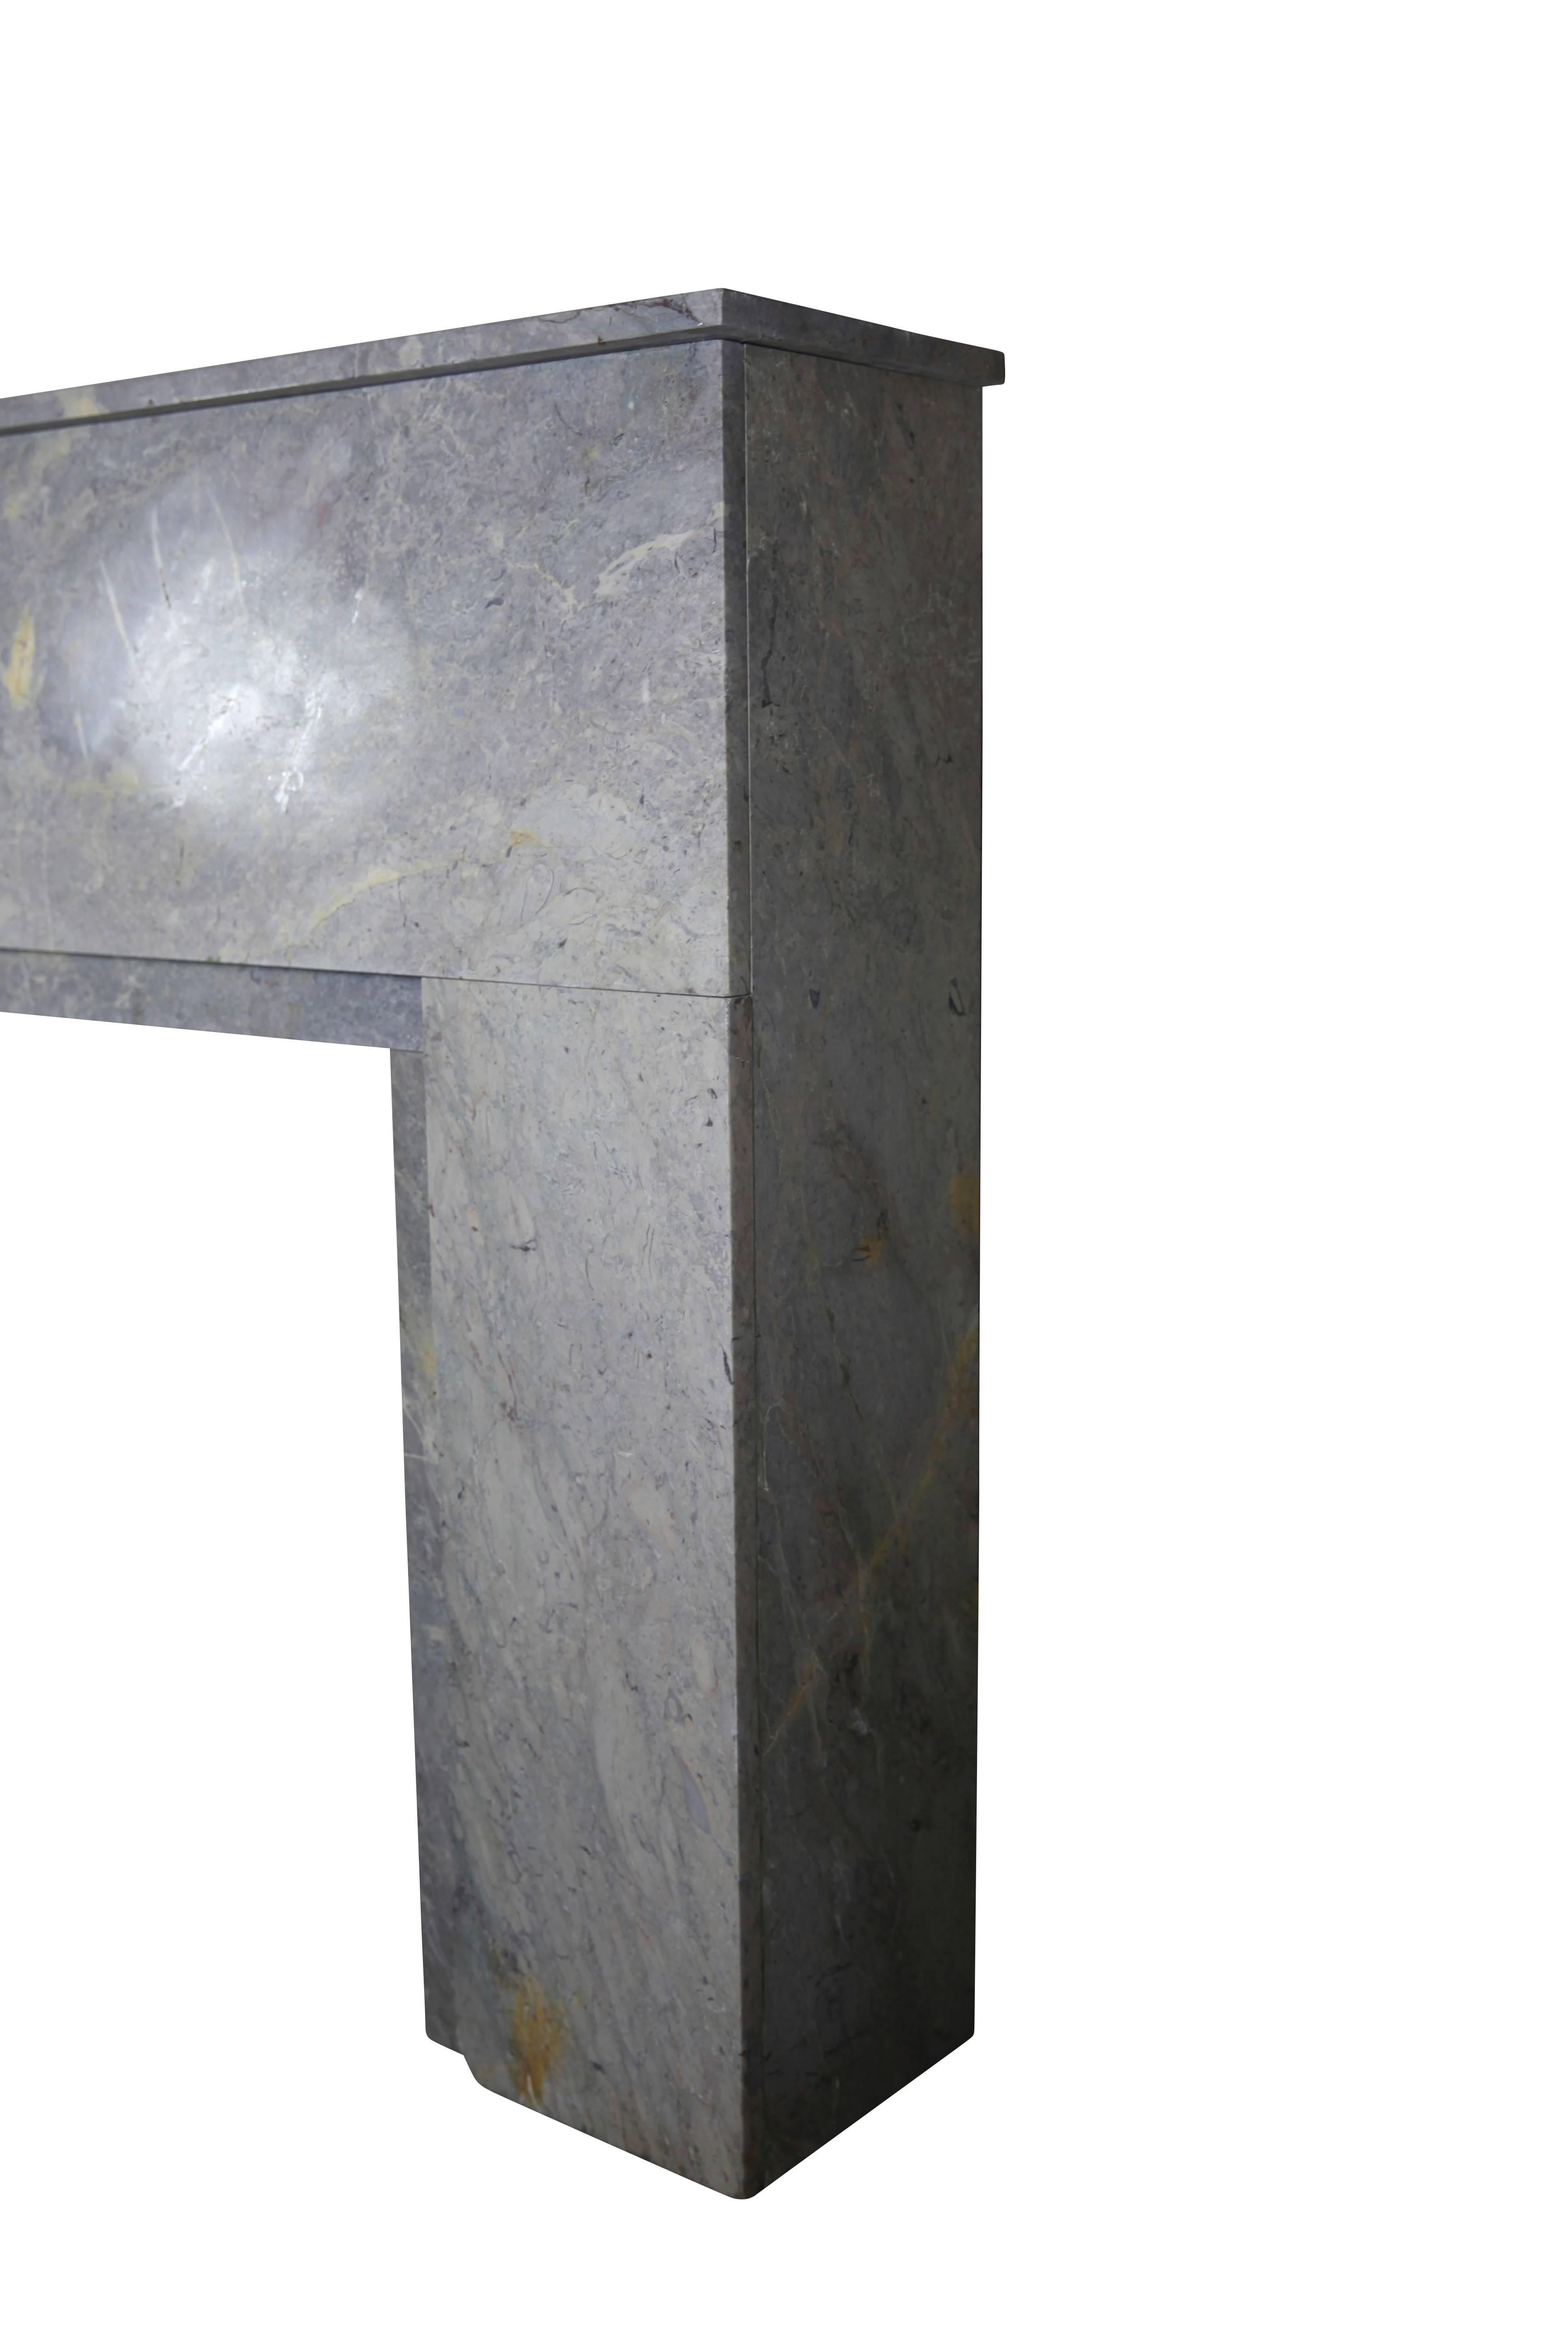 Art Deco marble antique fireplace mantle. This marble was also used in different historical landmarks such as the Chrysler Building in the early 20th century and many others
Measures:
113 cm EW 44.49”.
102 cm EH 40.16”.
54 cm IW 21.25”.
63 cm IH